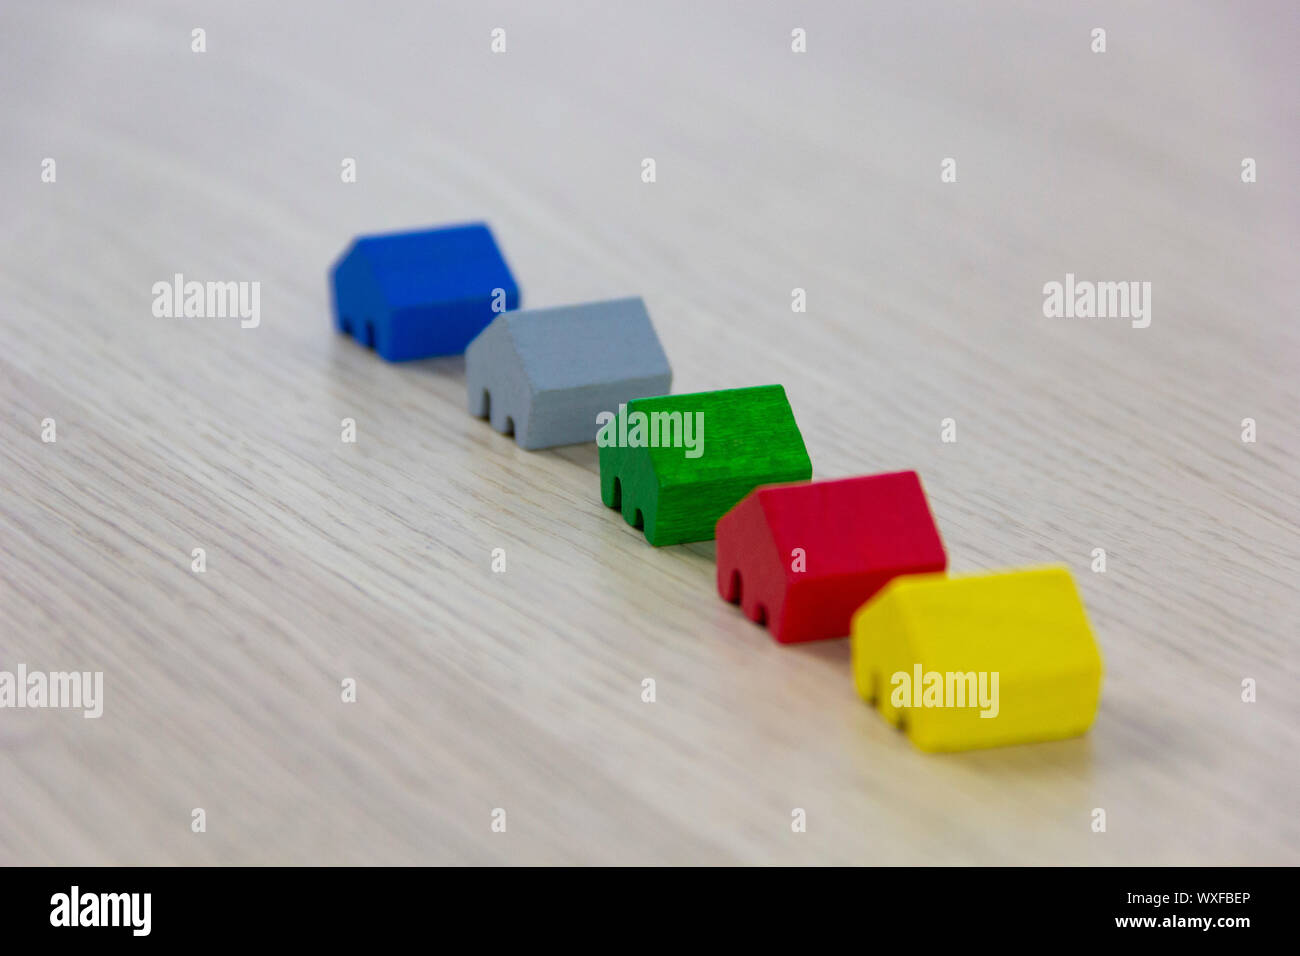 different colored game pieces representing different houses, concept of choice and diversity Stock Photo